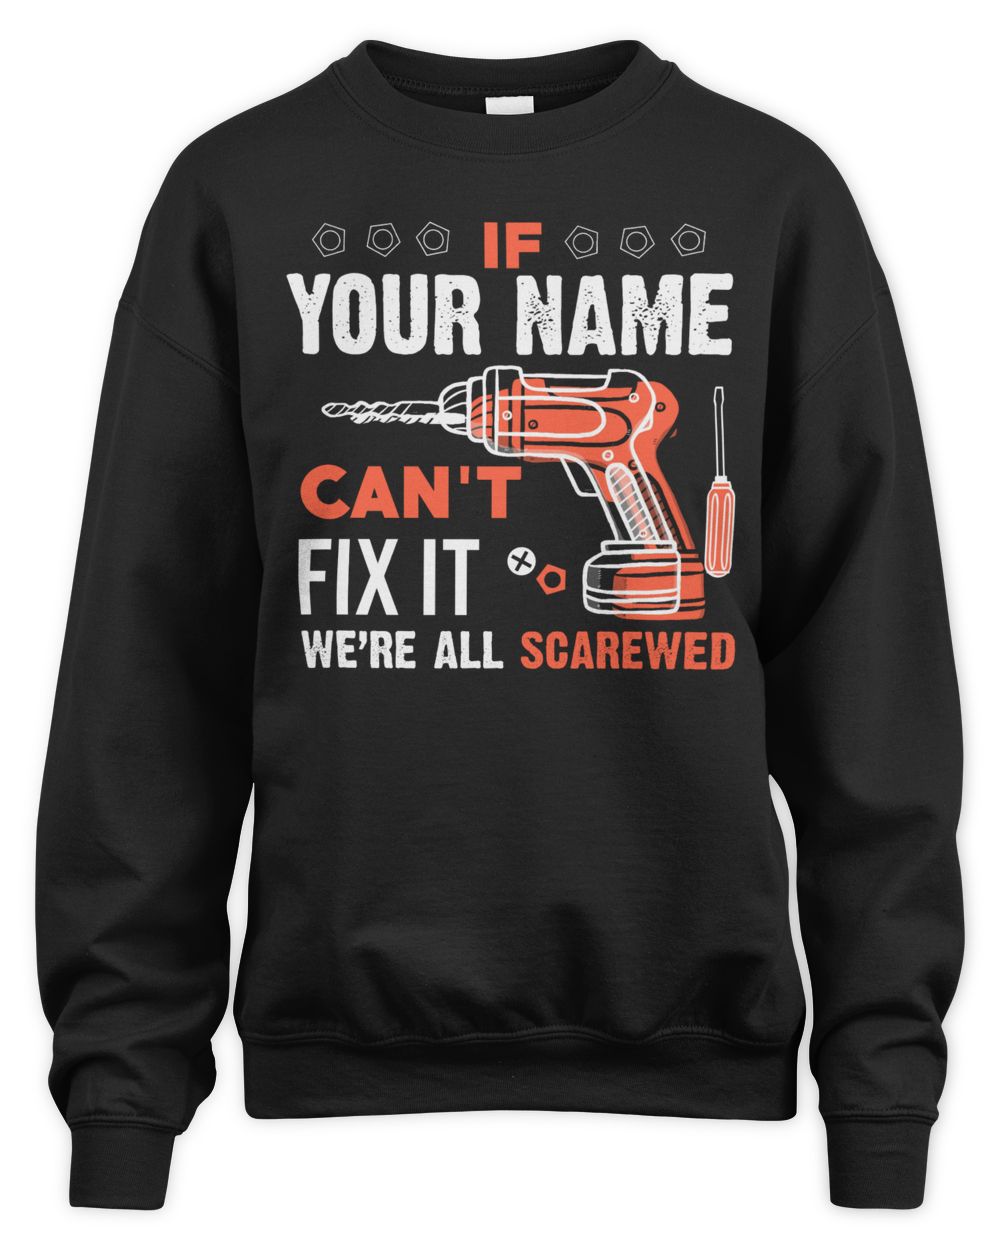 If YOUR NAME Can't Fix It .We're All Scarewed. Design Your Own T-shirt Online Unisex Sweatshirt black 